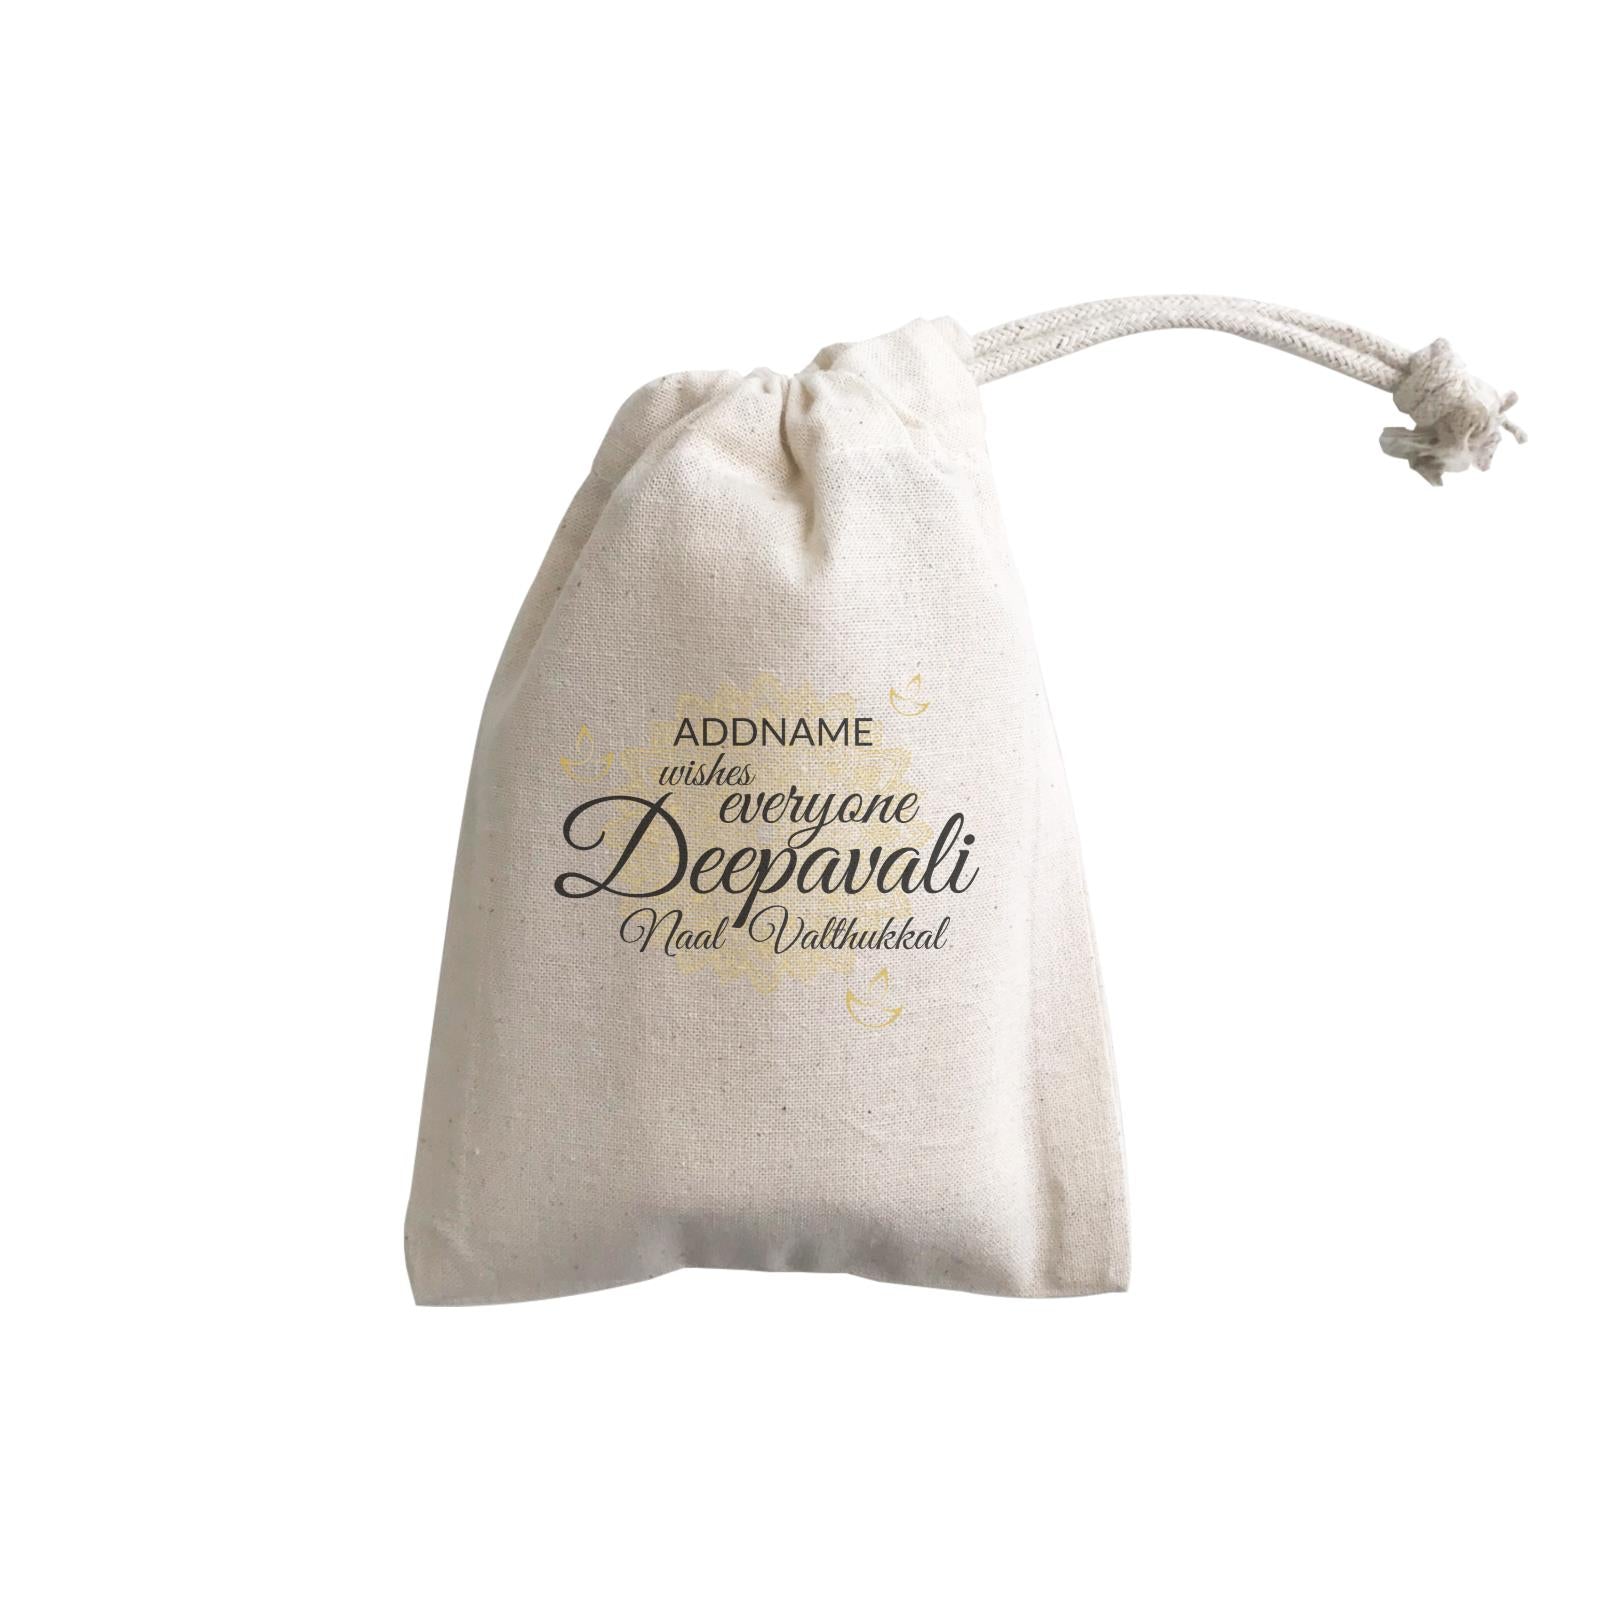 Addname Wishes Everyone Deepavali with Mandala GP Gift Pouch